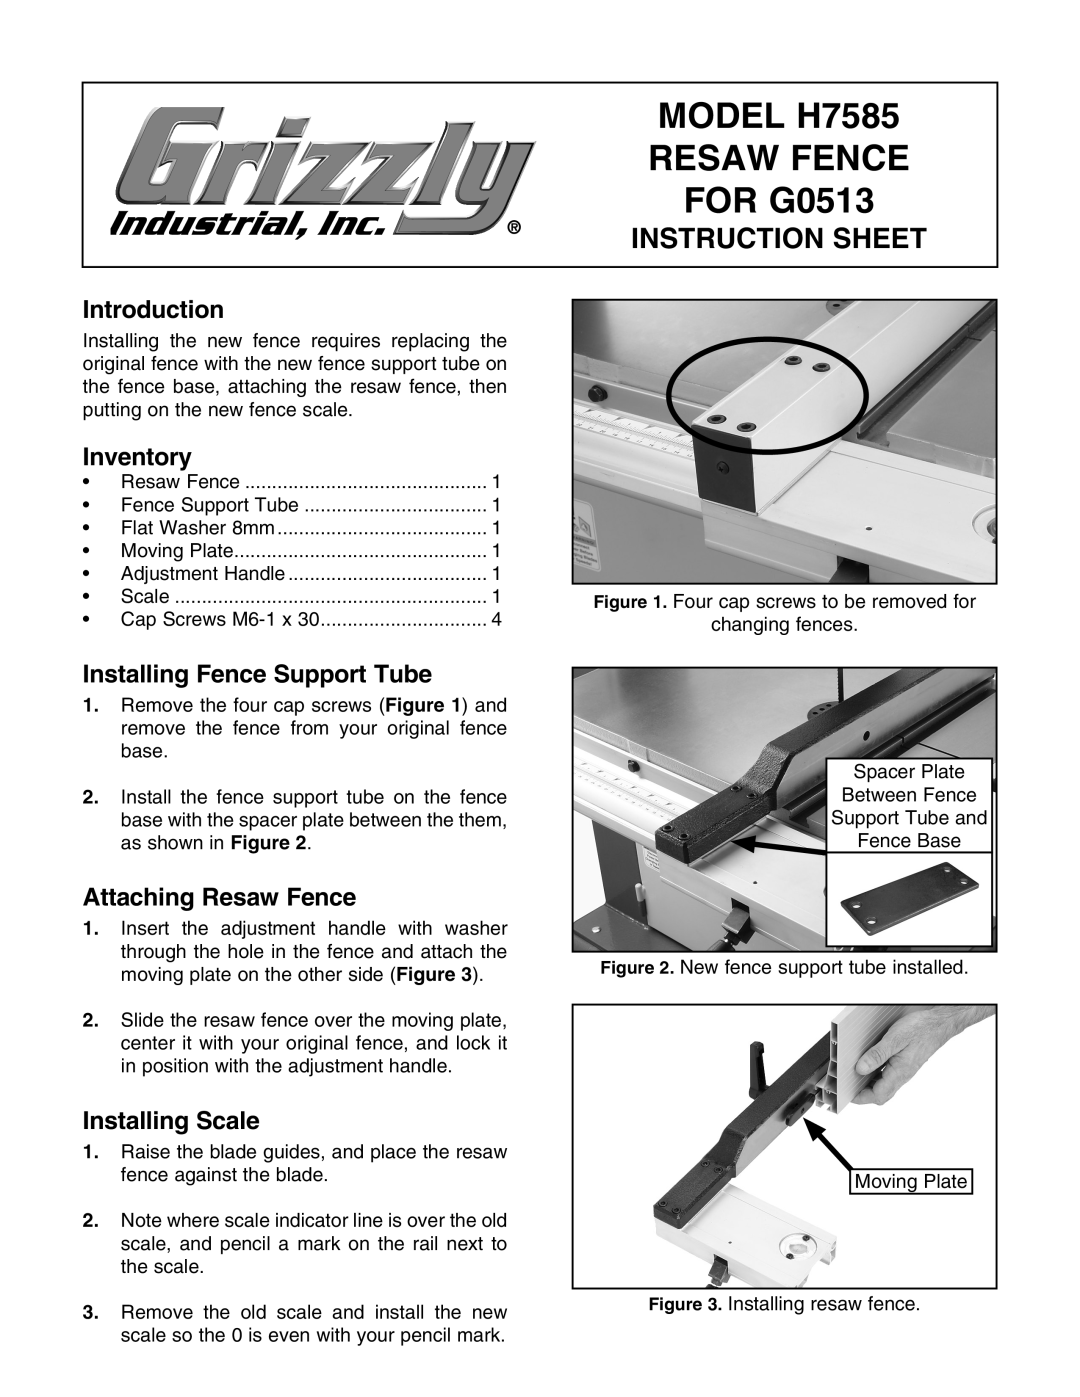 Grizzly instruction sheet MODEL H7585, Resaw Fence, FOR G0513, Instruction Sheet, Introduction, Inventory 